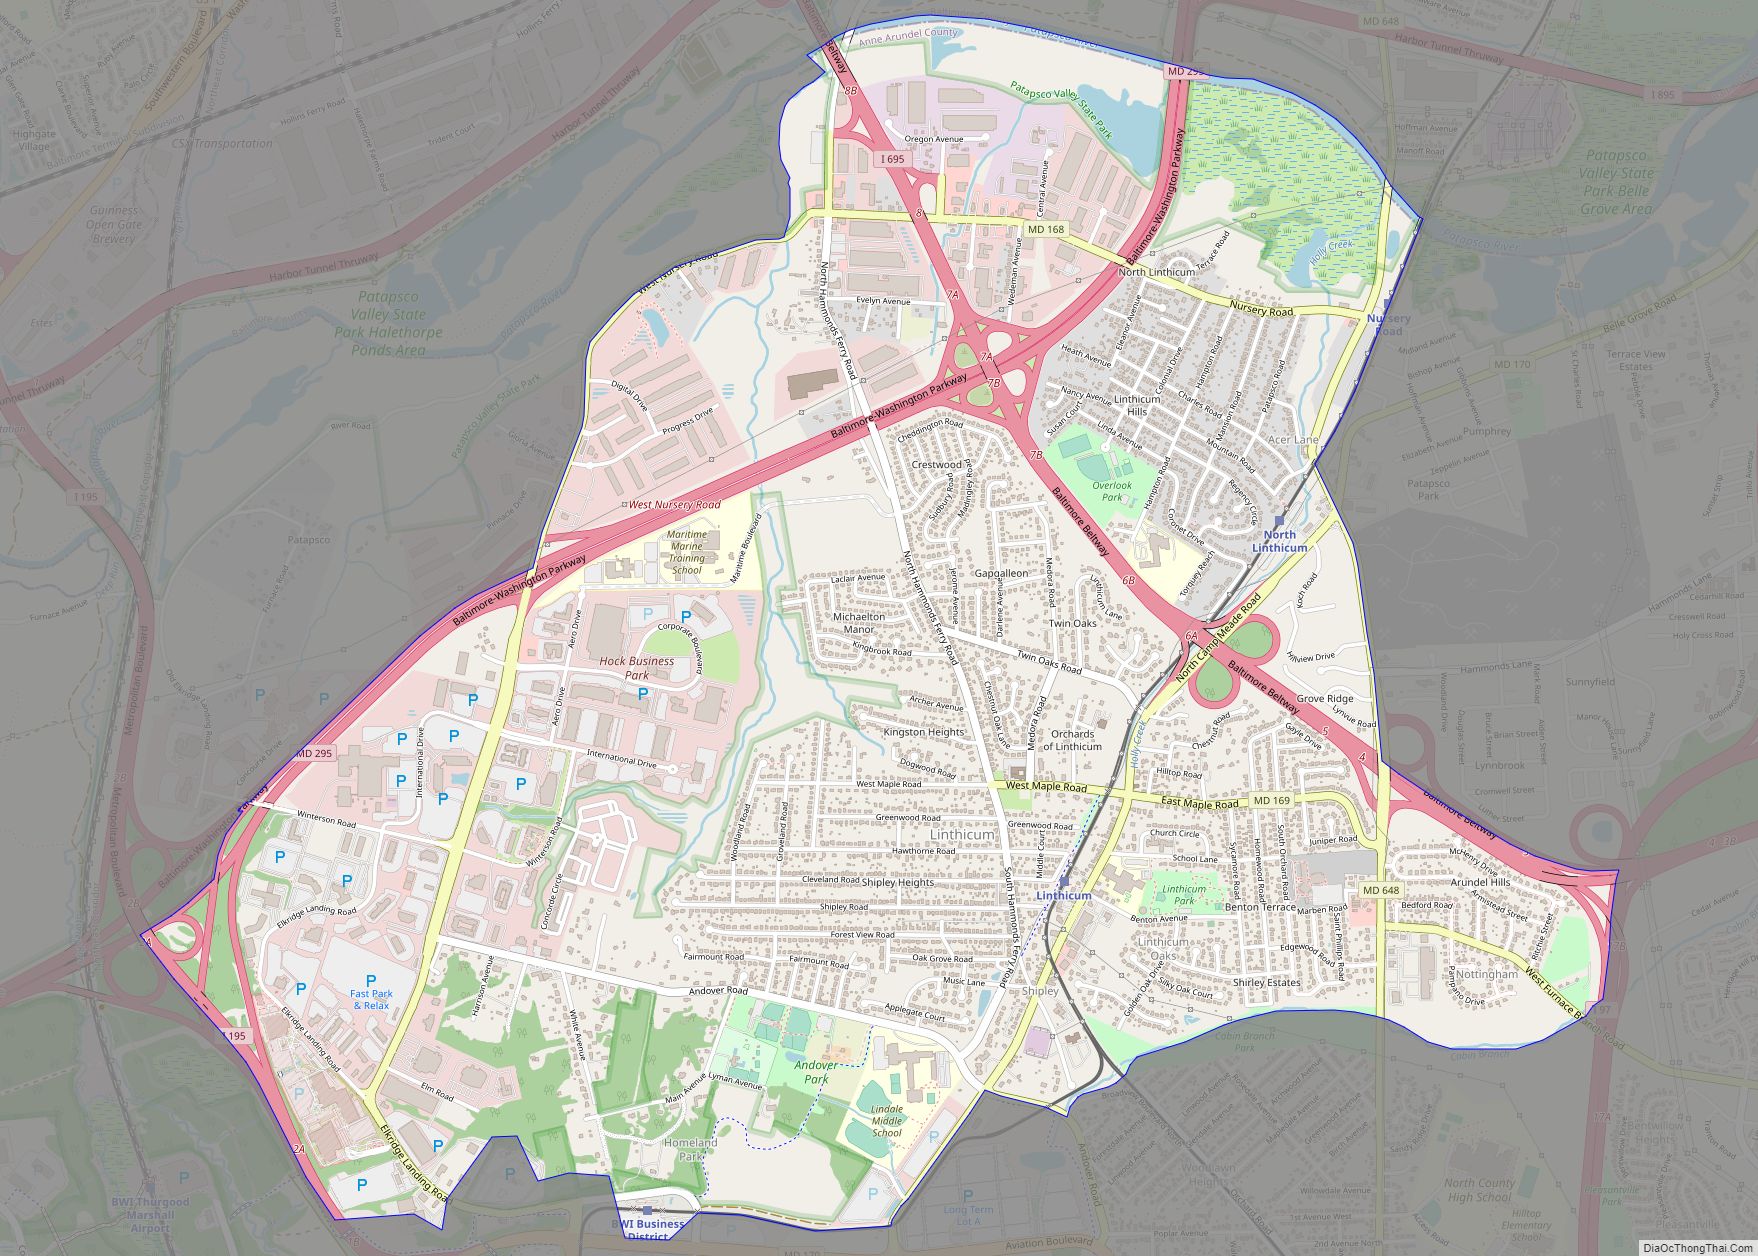 Map of Linthicum CDP